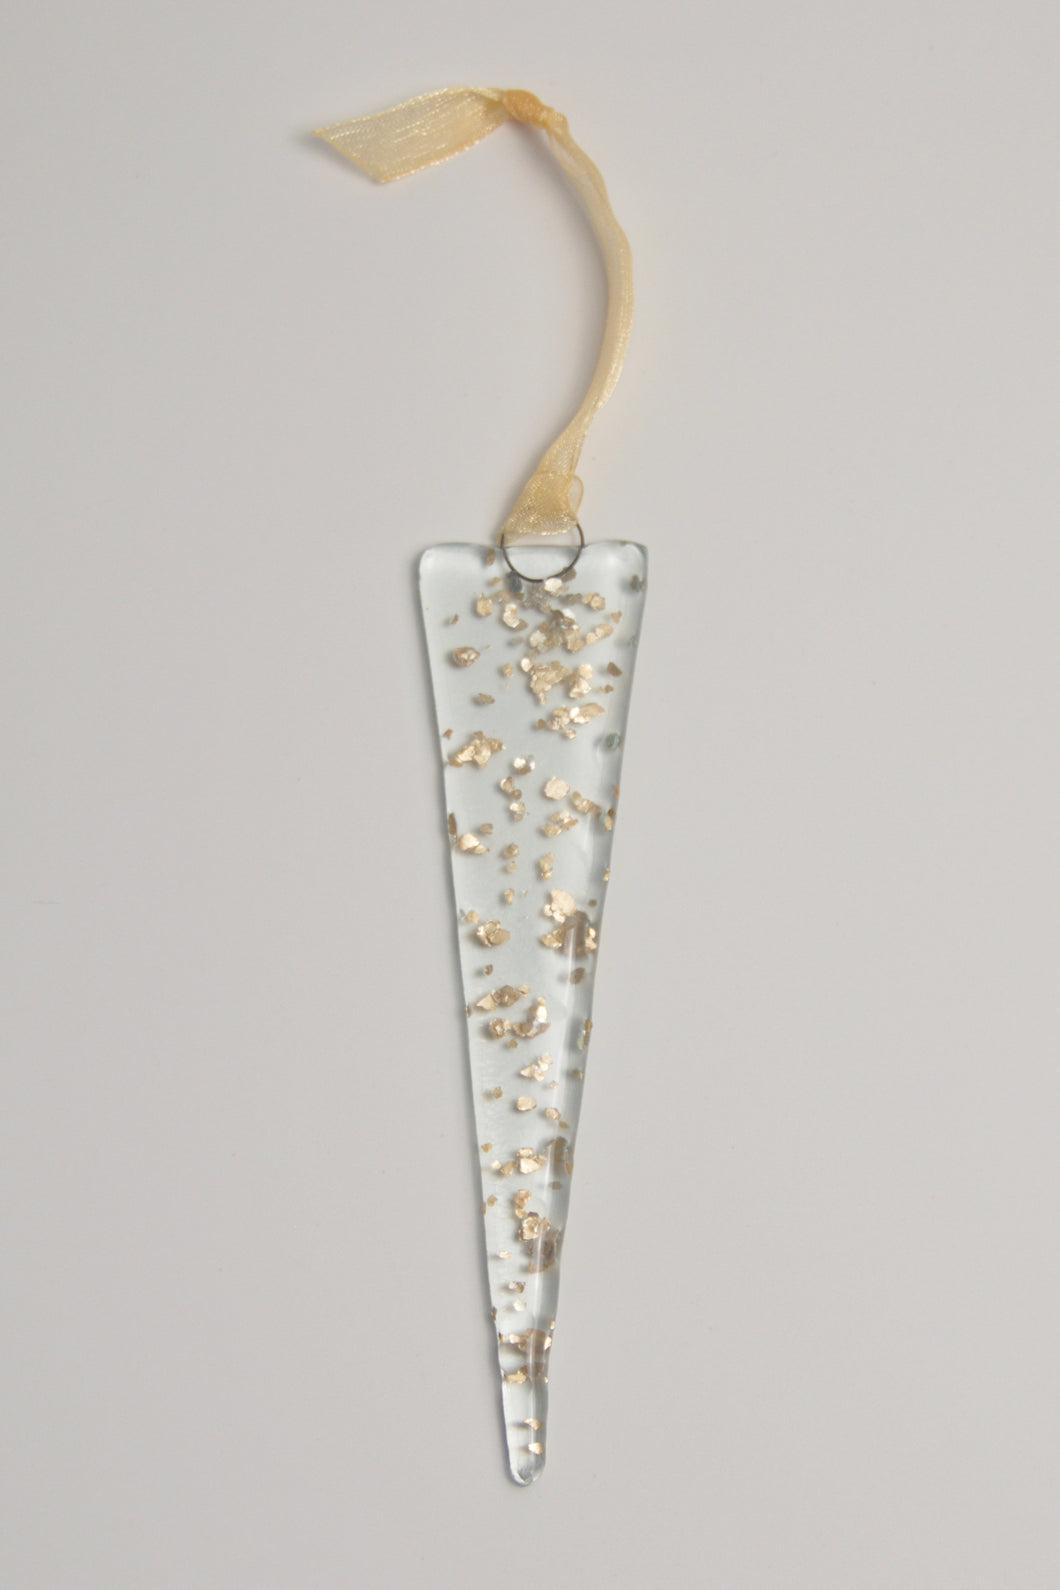 Gold Icicle hanging by Flow Glass Orkney Islands Scotland